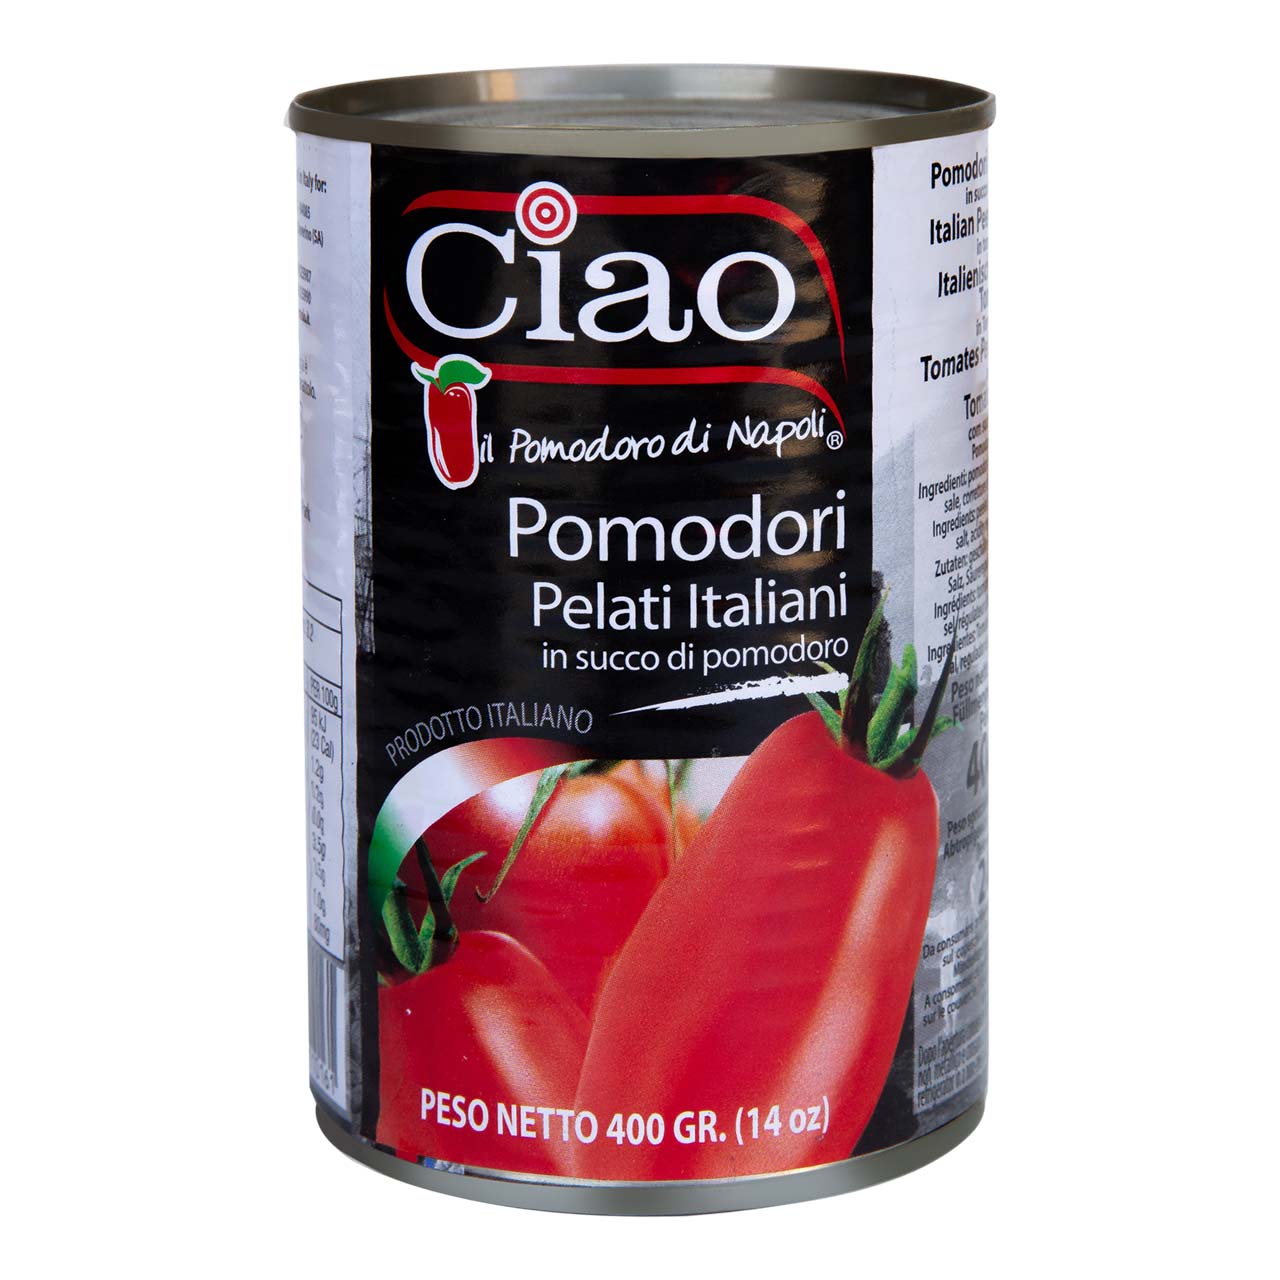 Ciao-Peeled-Tomatoes-400g-front